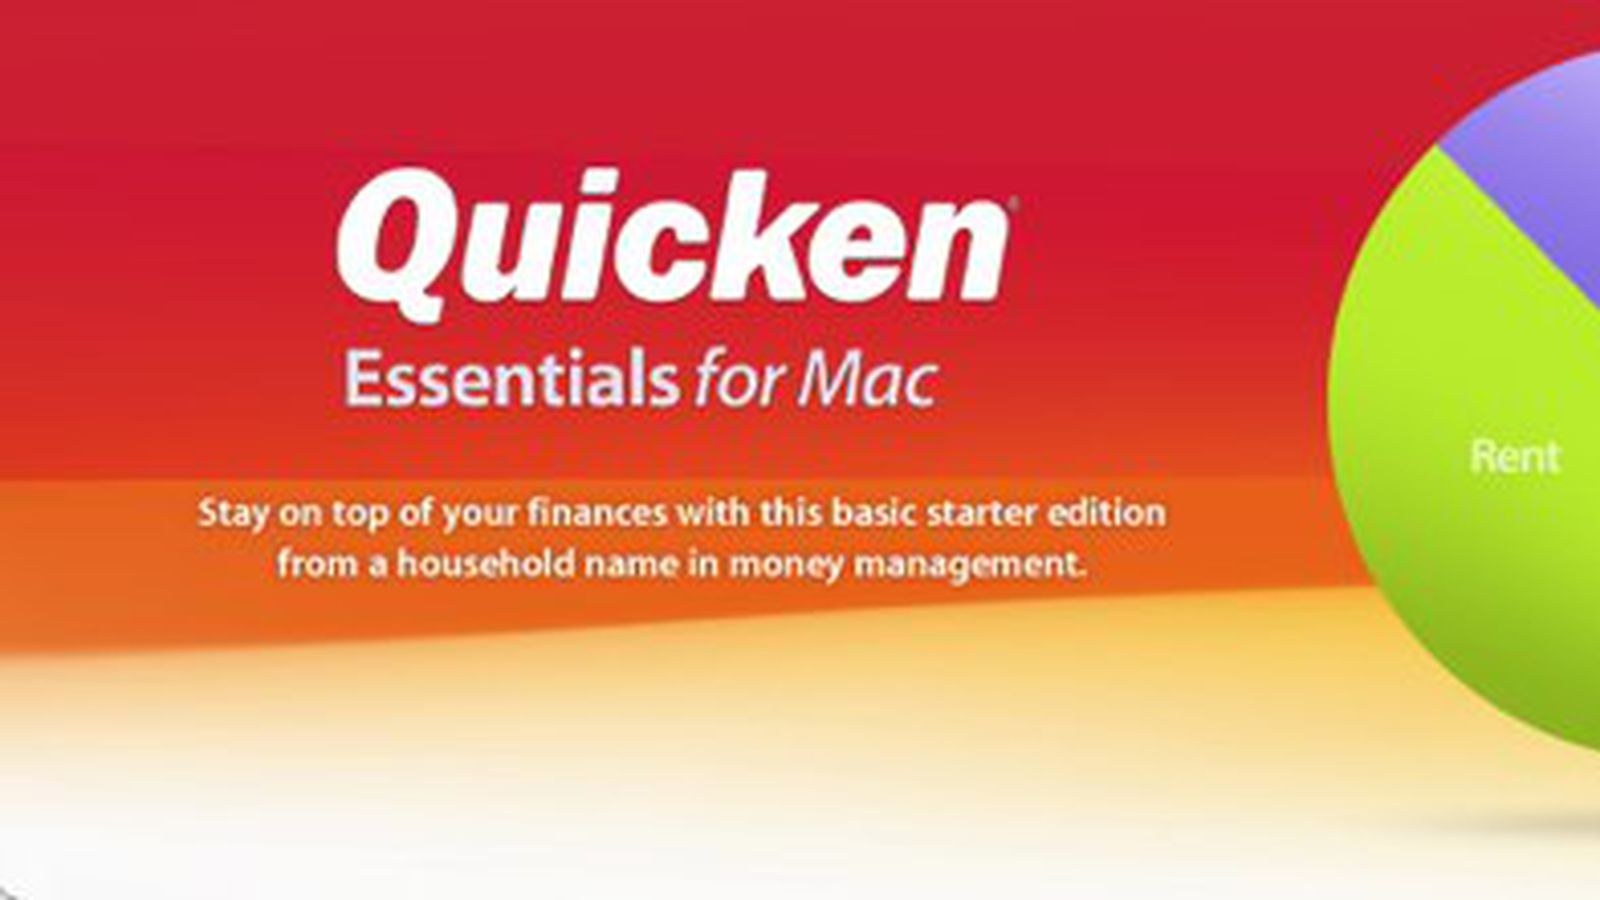 is the quicken starter edition the same for both mac and pc